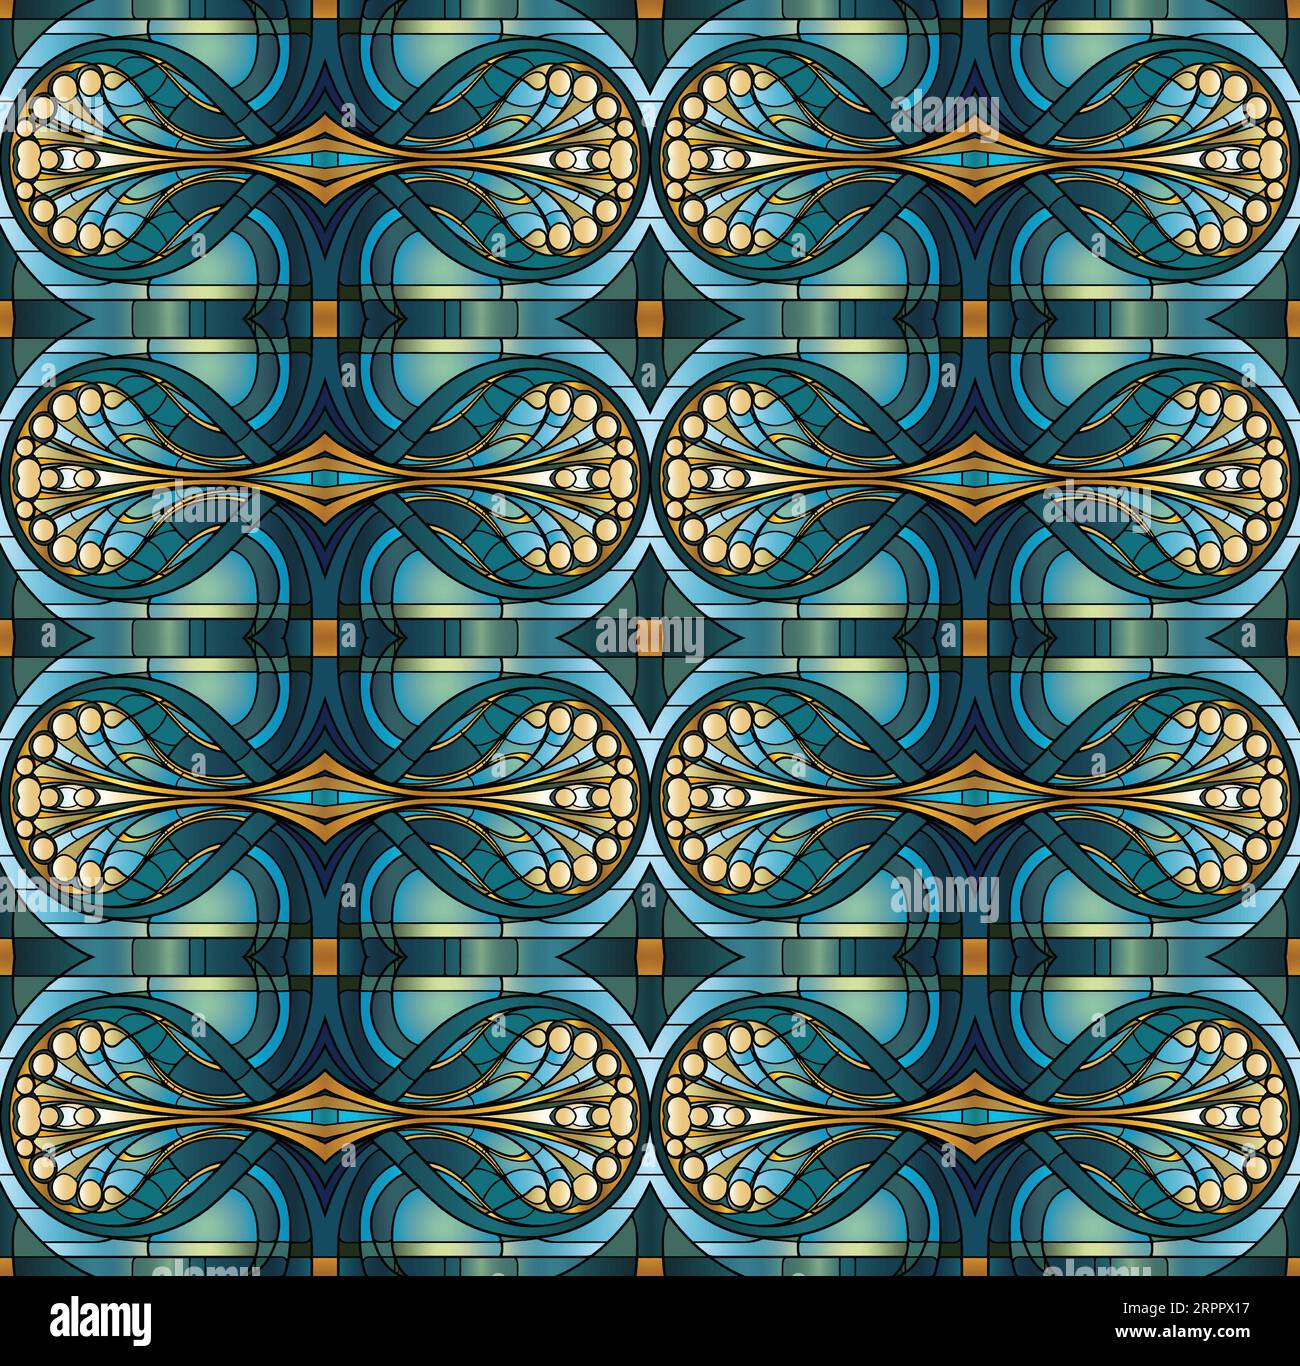 Seamless, repeating art nouveau style pattern of a peacock tail fan, background tile pattern Stock Vector